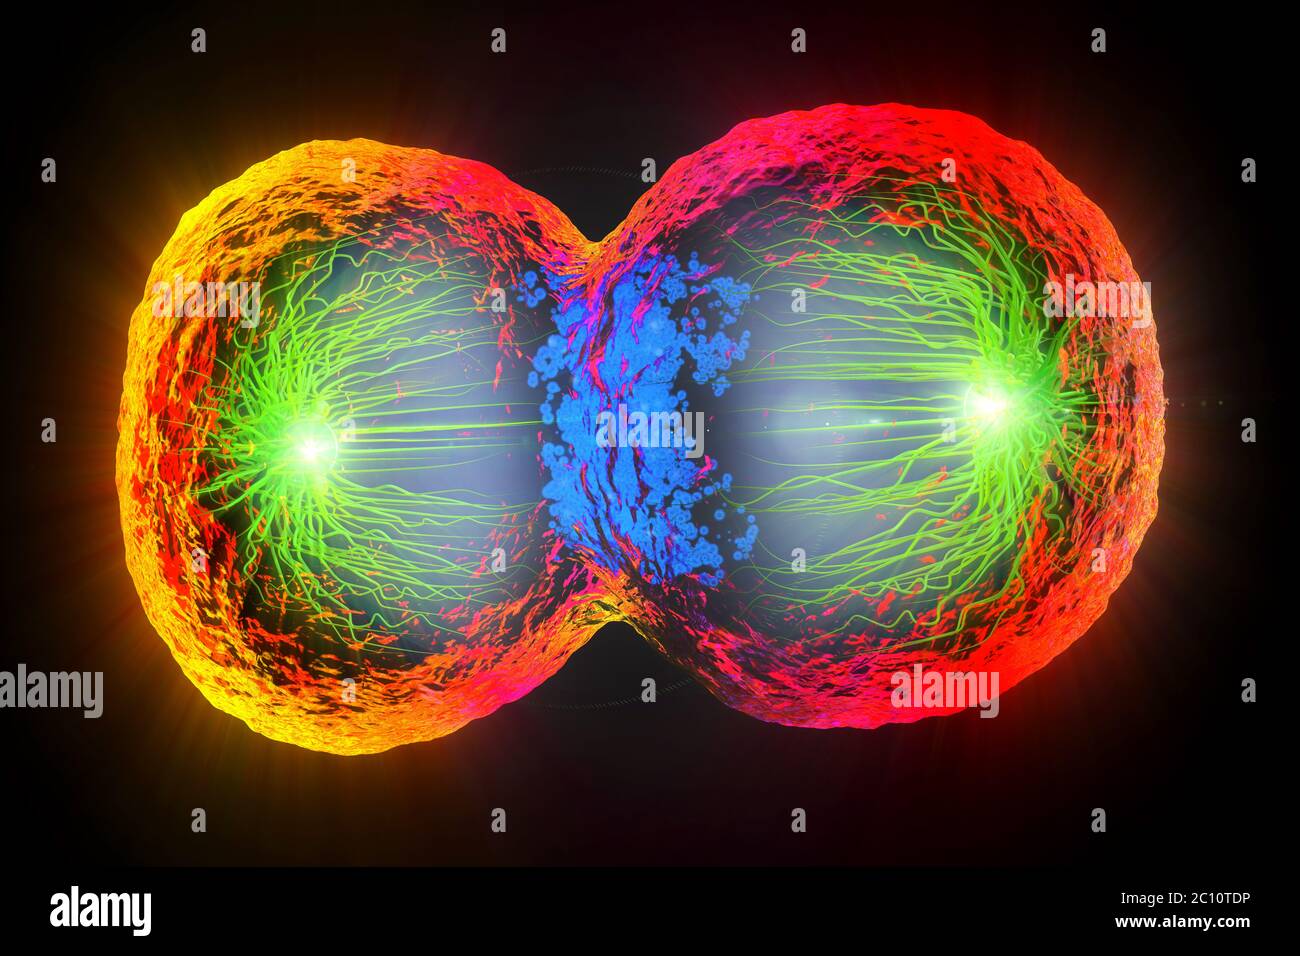 3d illustration of colorful cell division, cell membrane and splitting nucleus Stock Photo